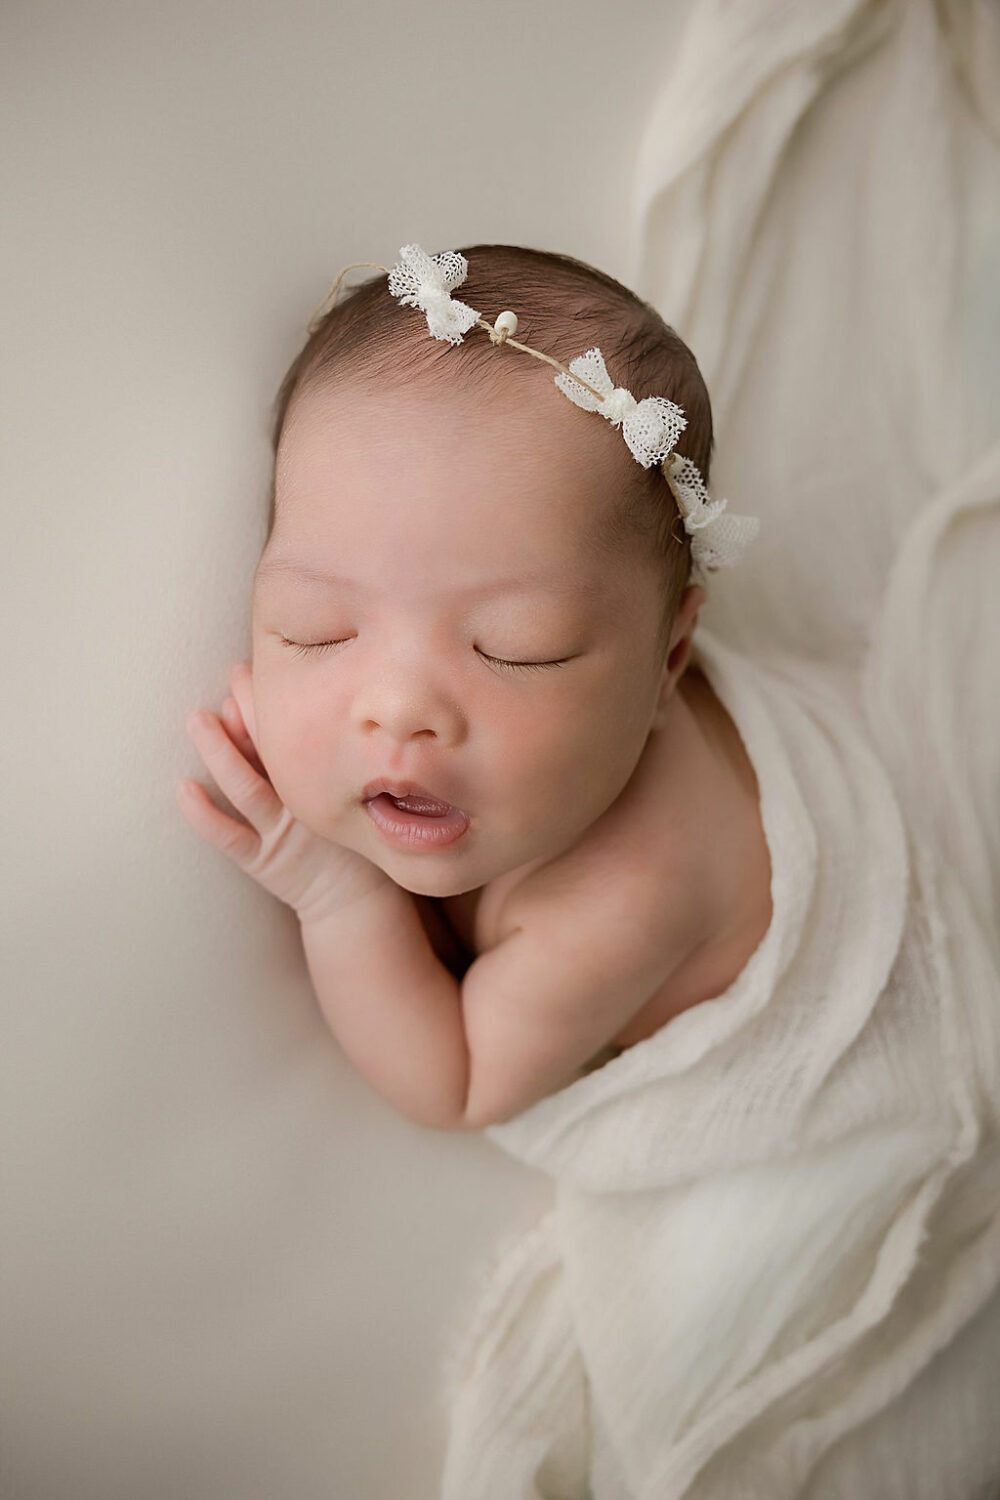 Newborn girl laying head on her hand sleeping with her mouth open for her newborn photography session in Hainesport, New Jersey.